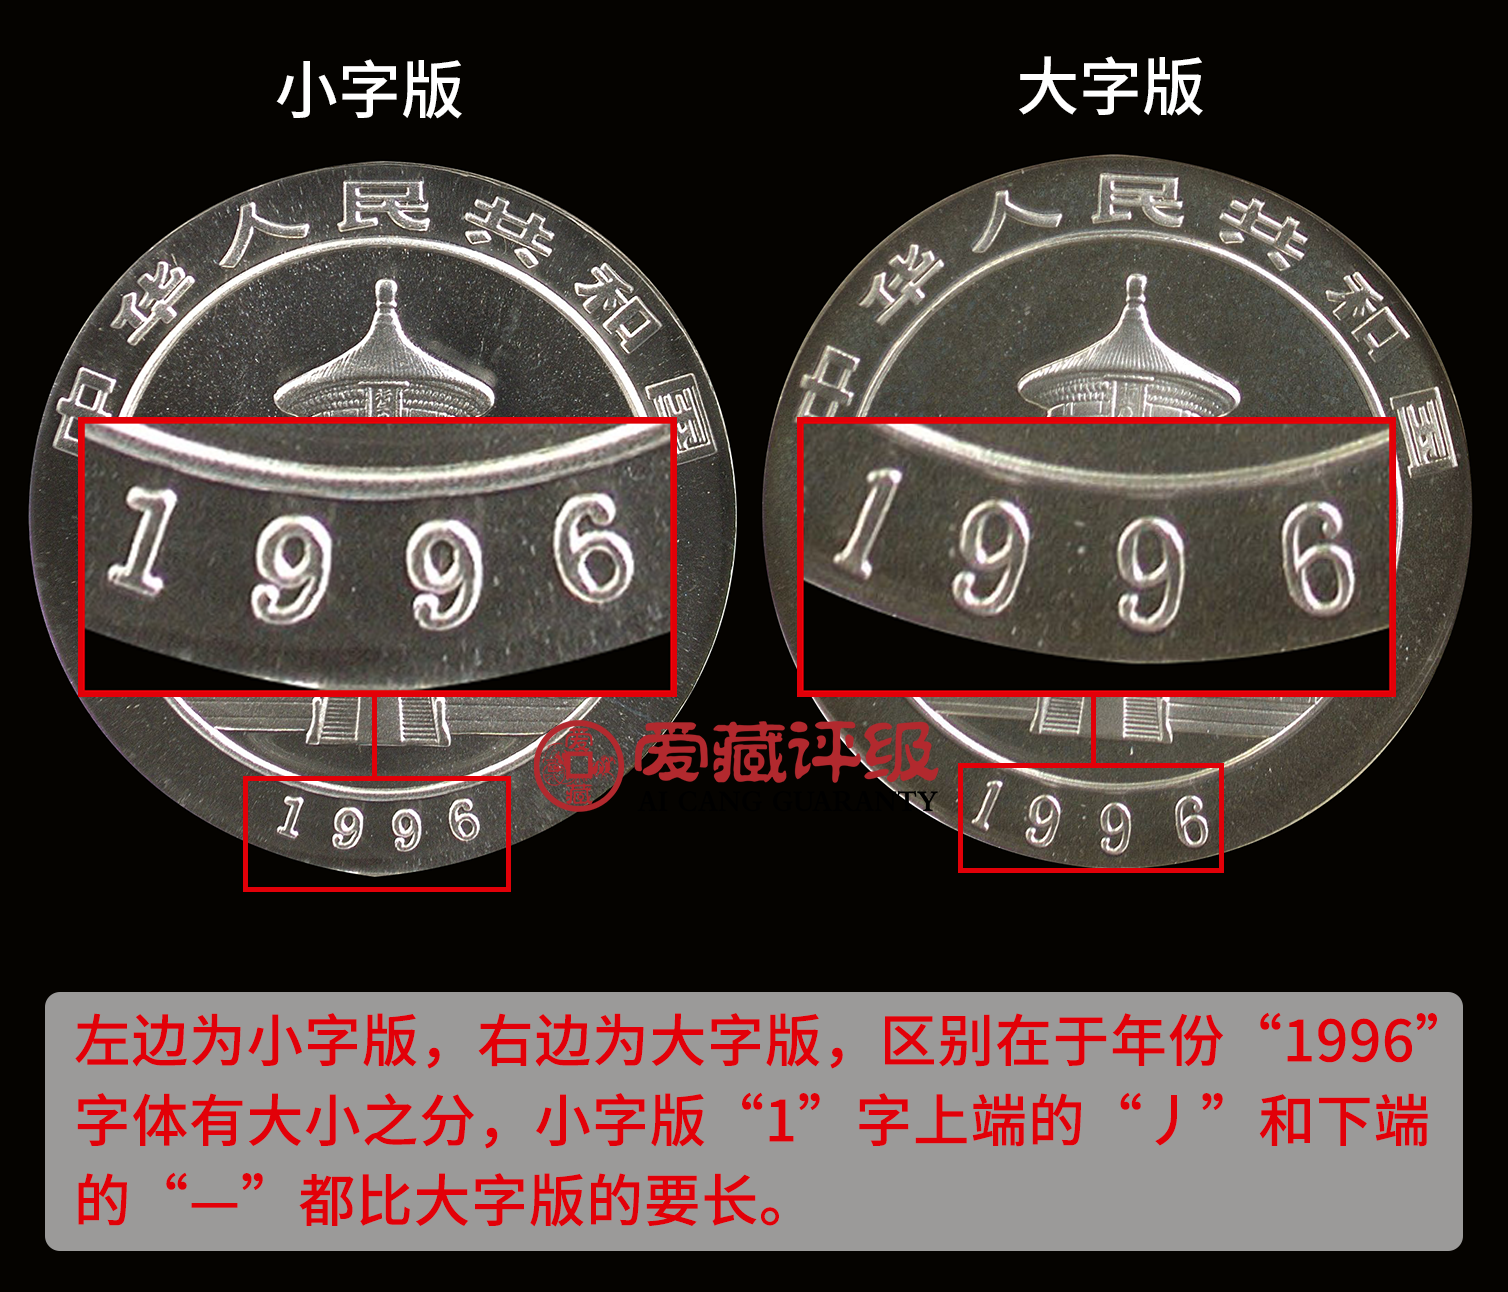 1996（1）.png